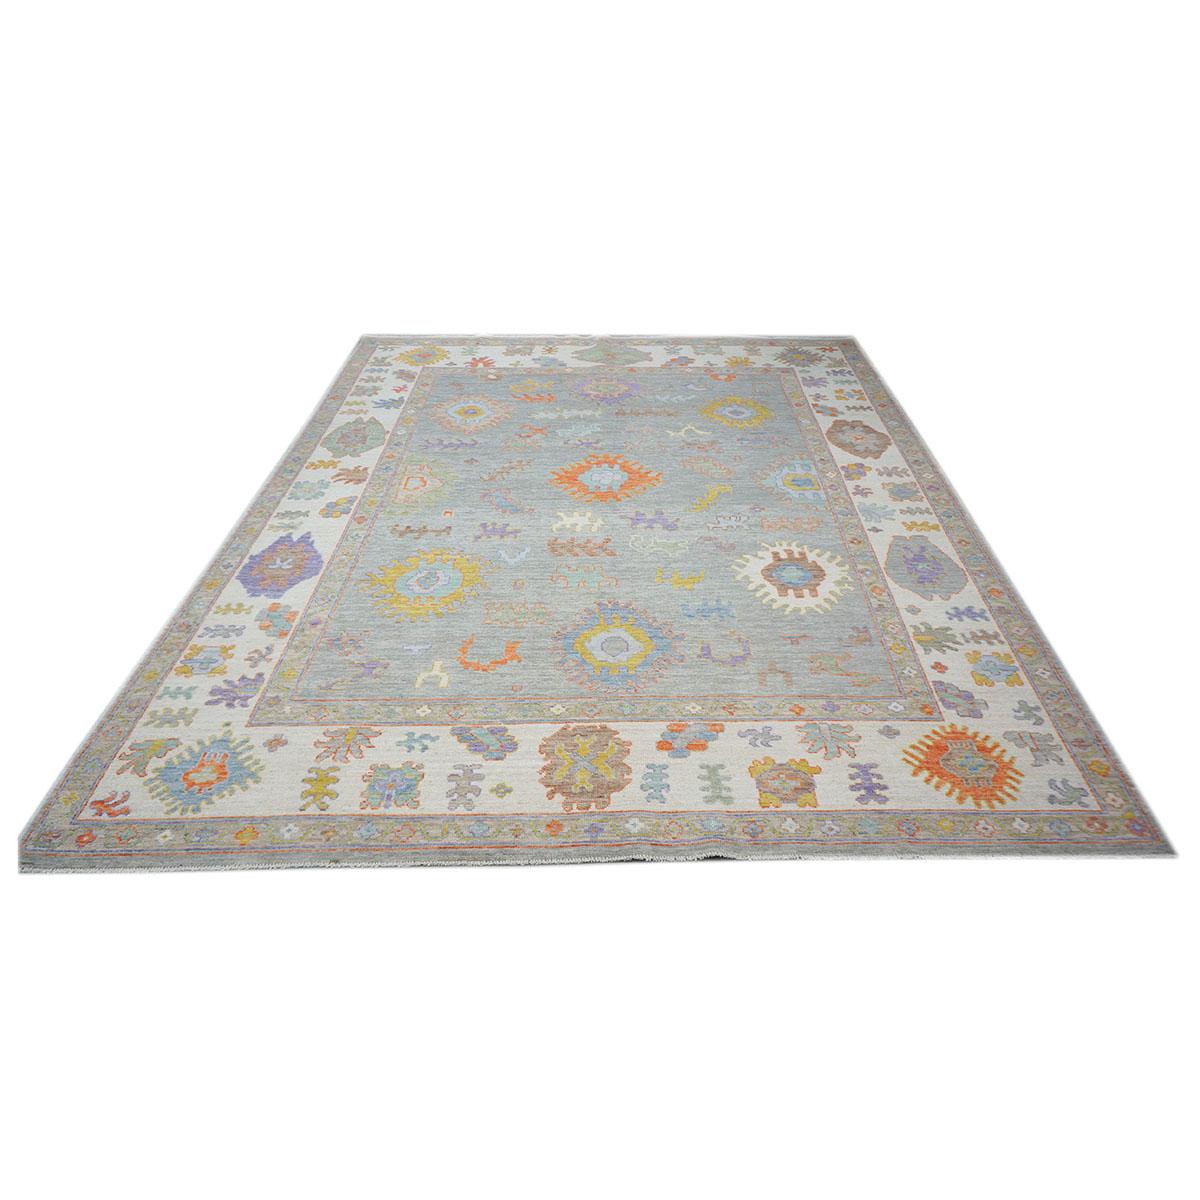 Ashly Fine Rugs presents a 21st-century Turkish Oushak 8x10 grey, ivory, & multi color handmade area rug. Oushaks began in a location just south of Istanbul, in a region that was to become the rugs namesake, Oushak. Although nomads first produced